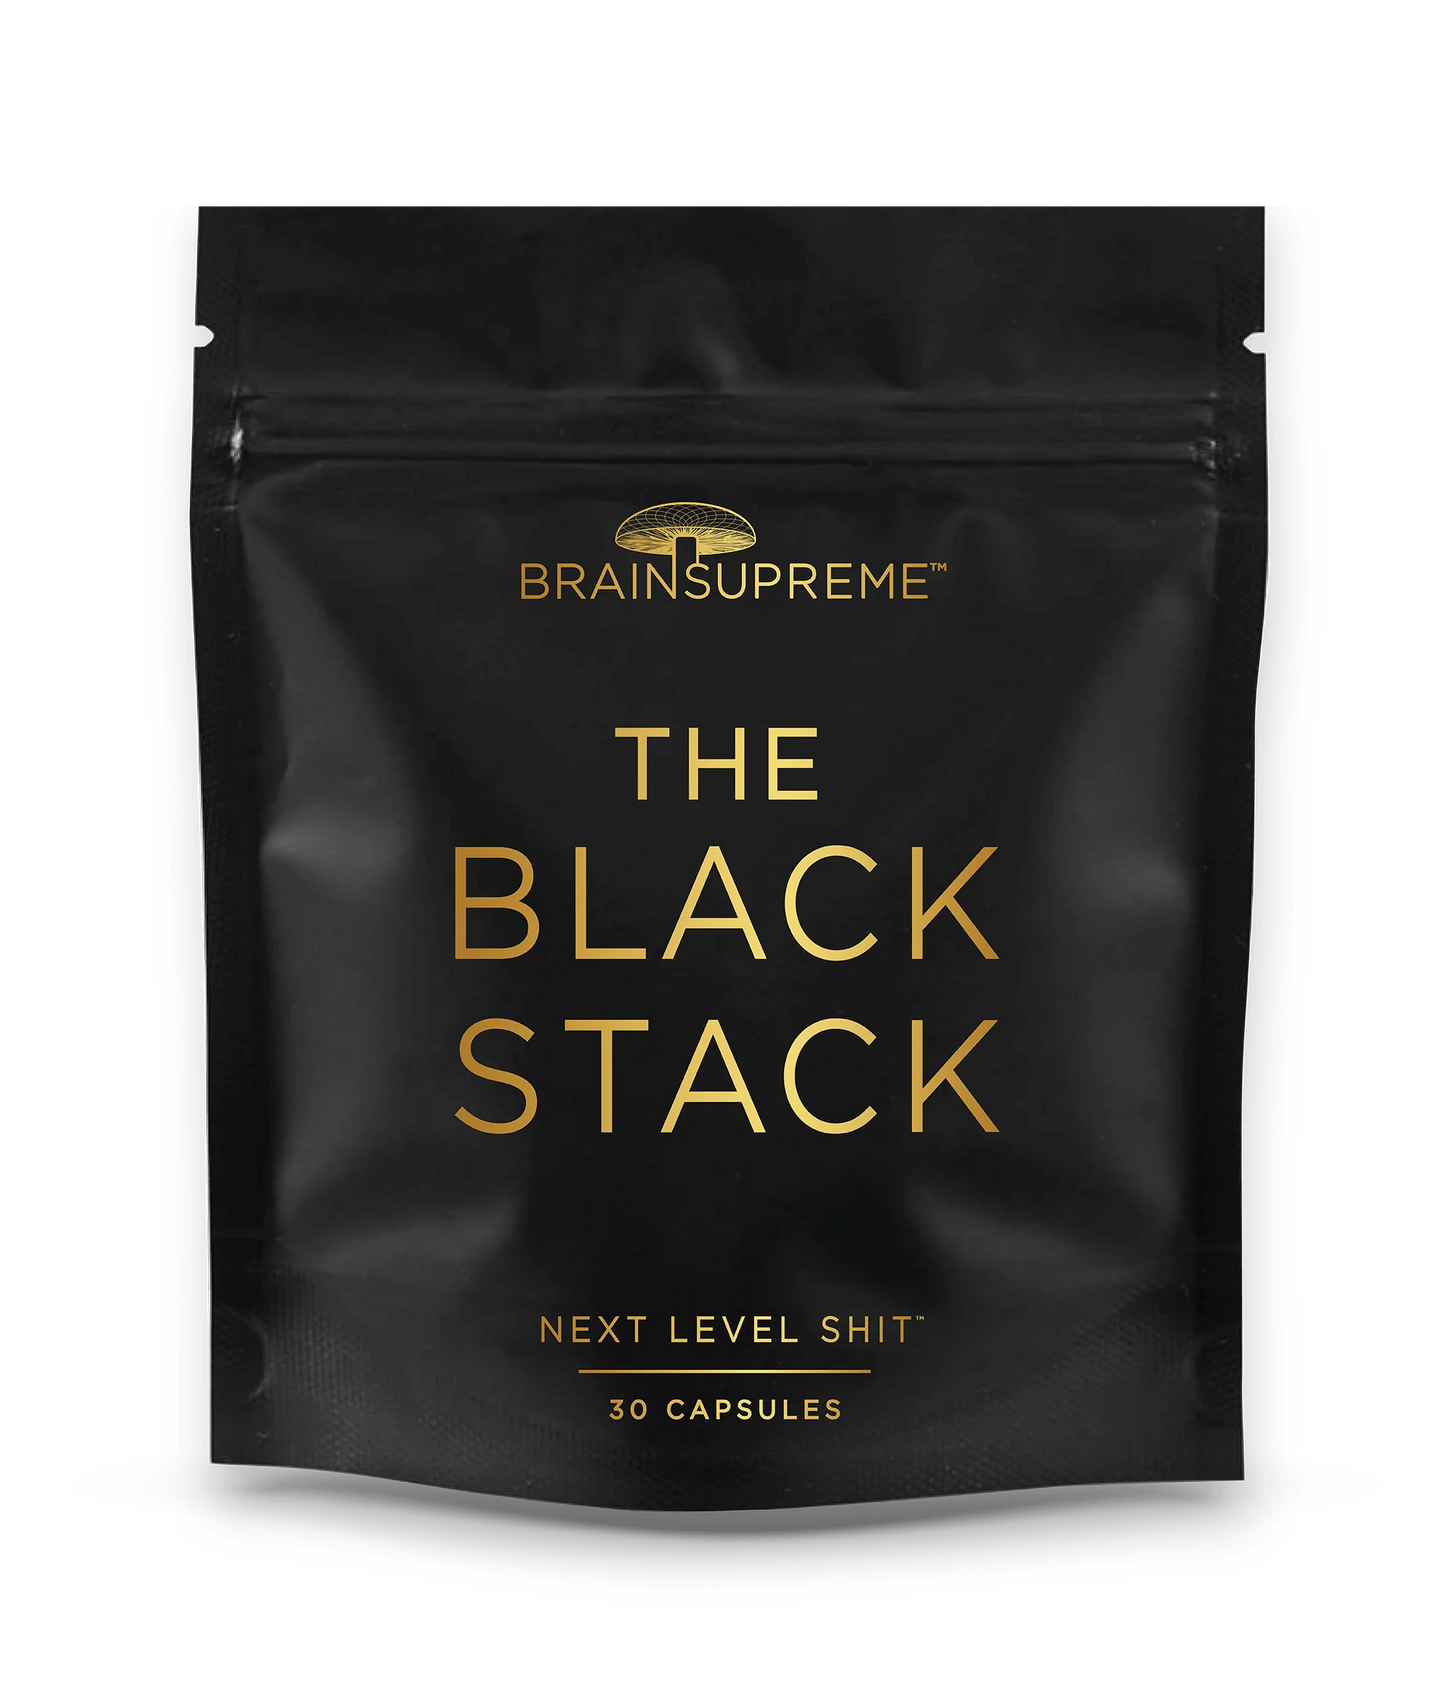 The Black Stack